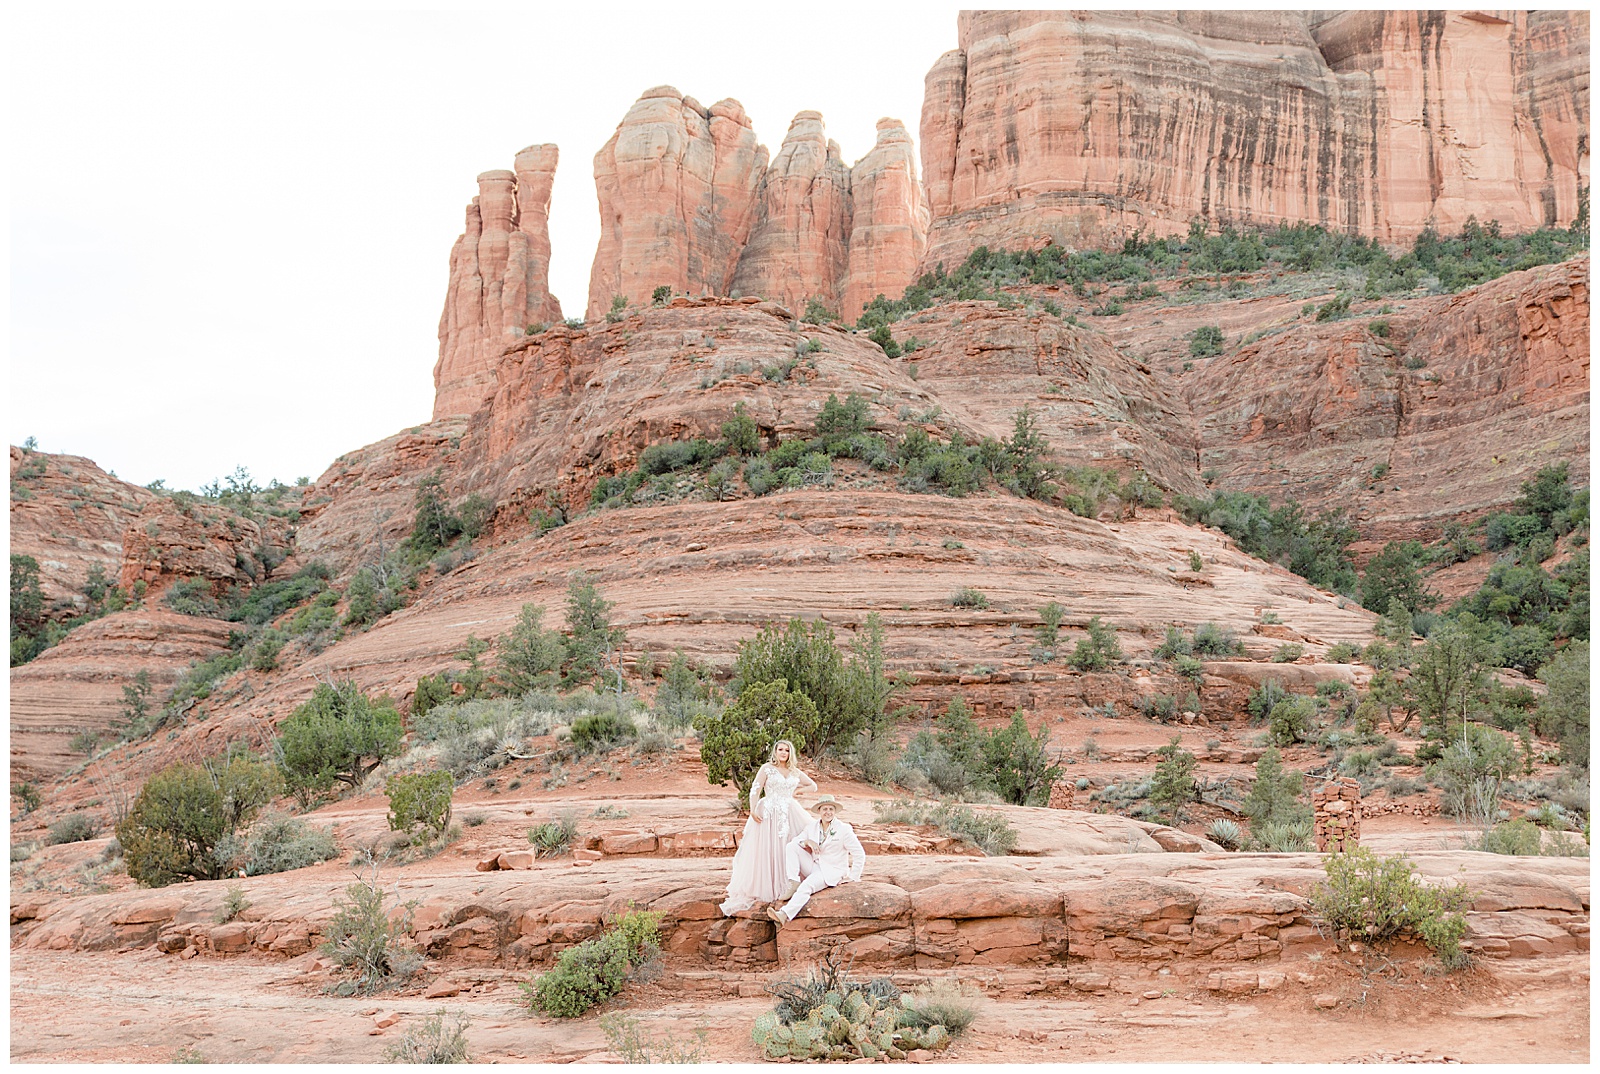 Groom sits on the rocks while bride admires the view of Sedona